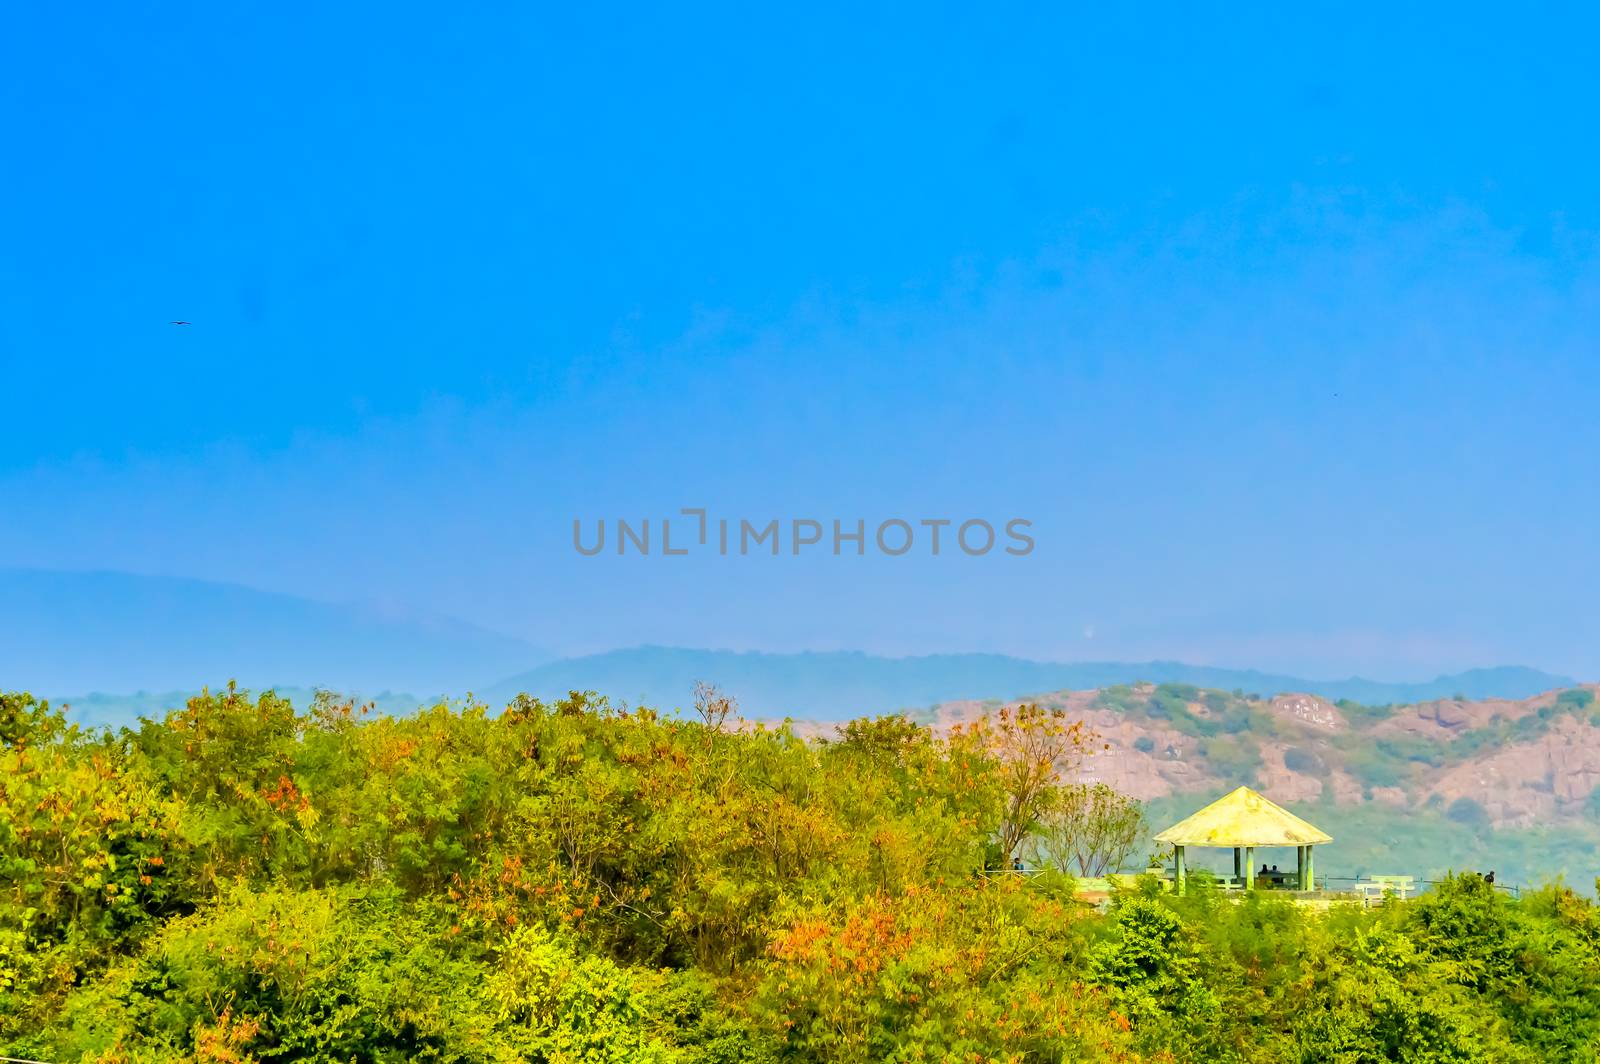 Sunset point in hill View from top at daytime sunny day landscape style Use background wallpaper screen saver e-cards website Nature Travel Vacation Holiday Concept Snap in christmas new year.